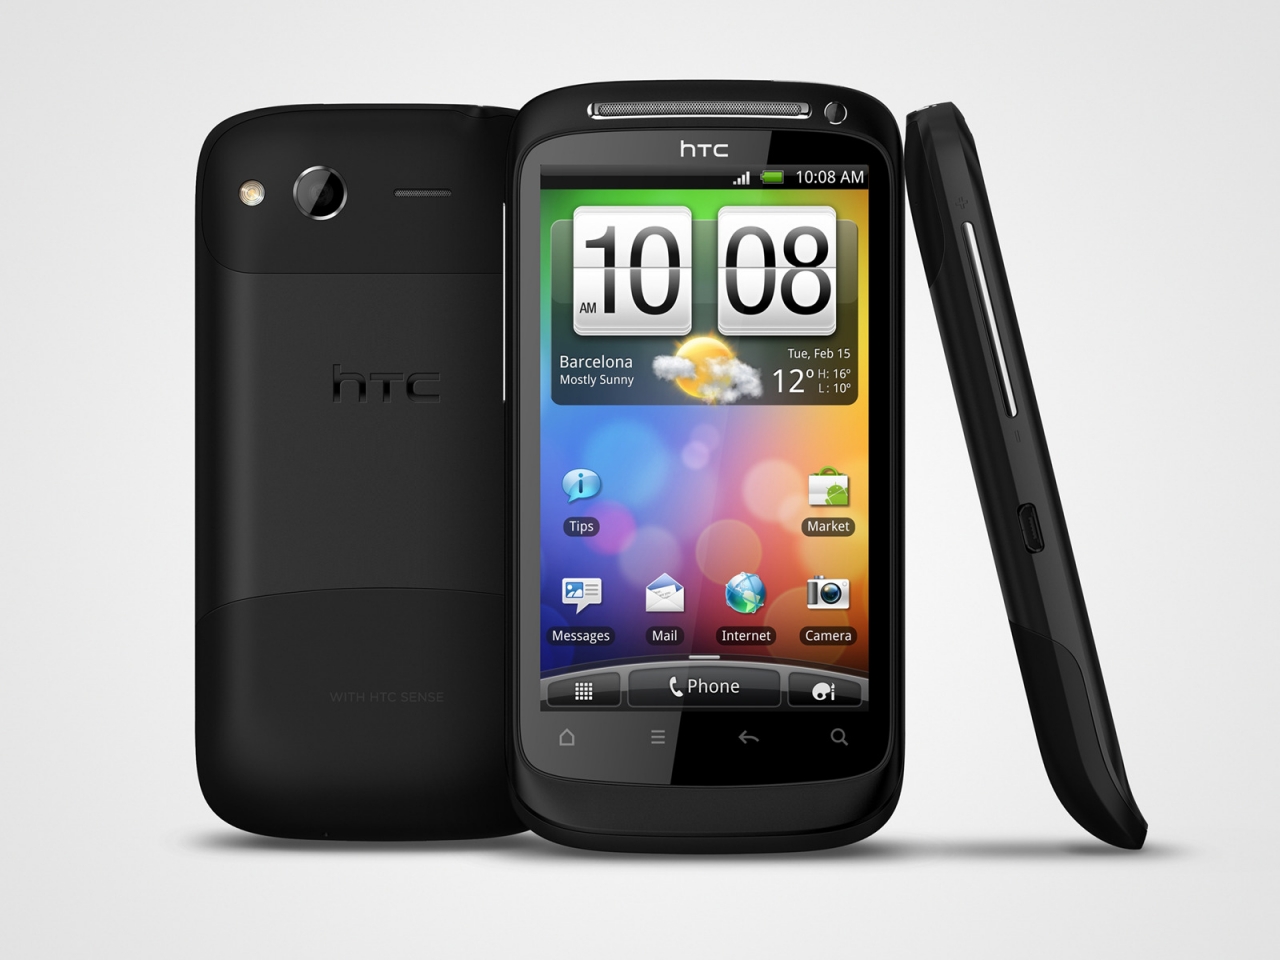 HTC Desire S for 1280 x 960 resolution